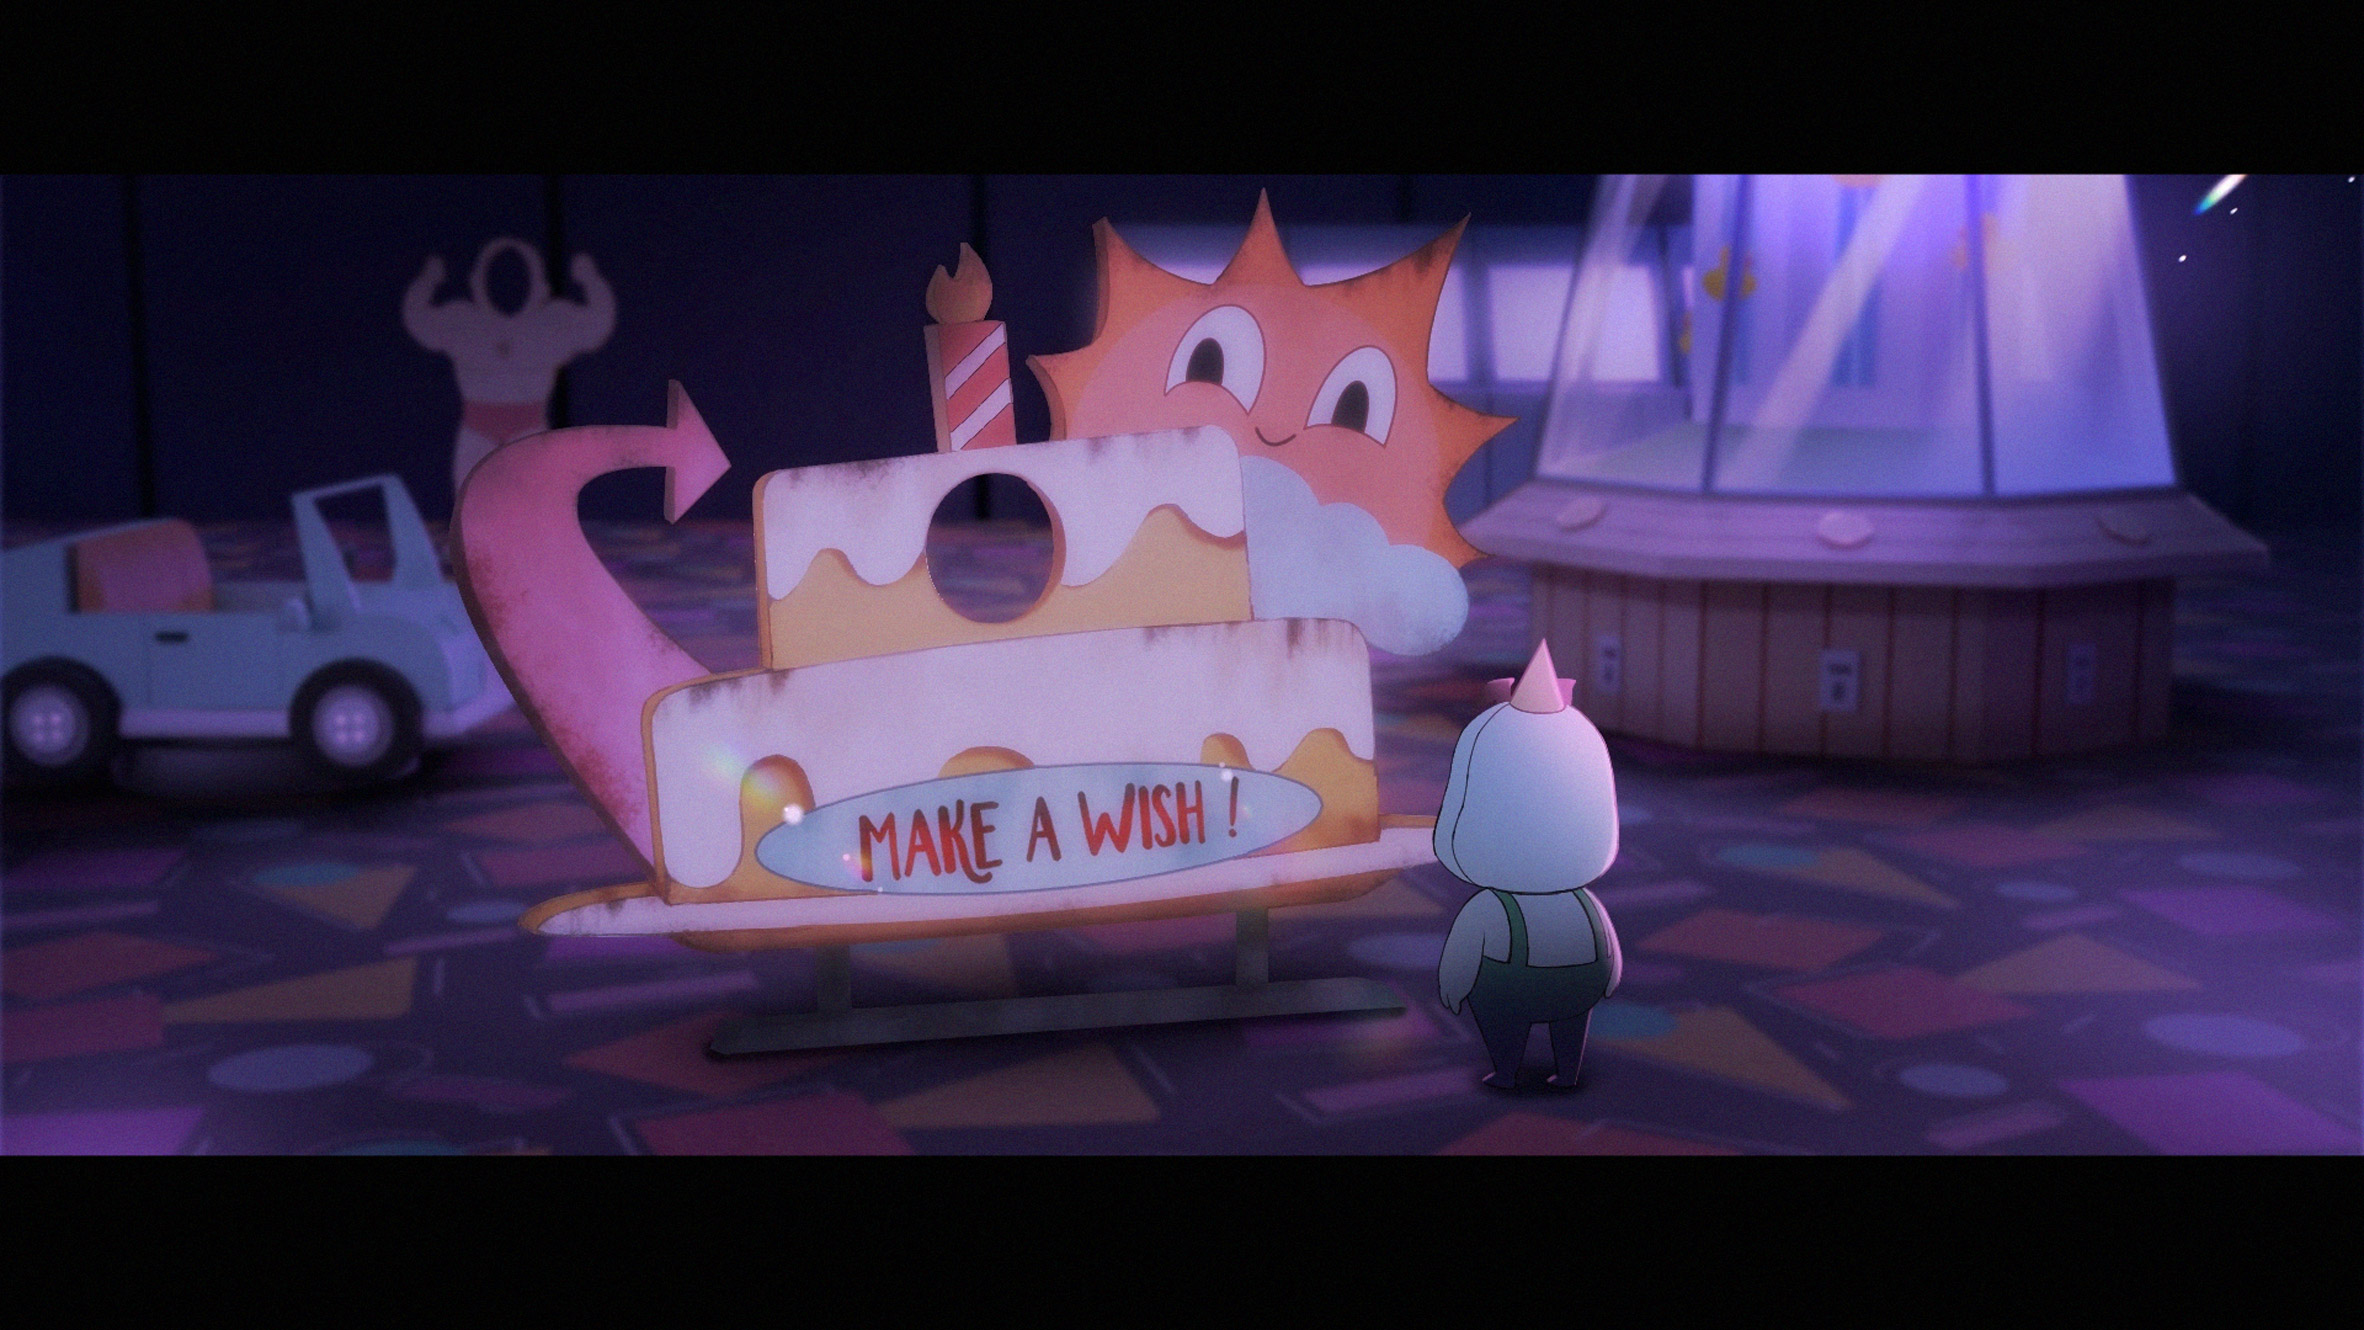 Frame from an animation showing a child in front of a wooden cut out sign